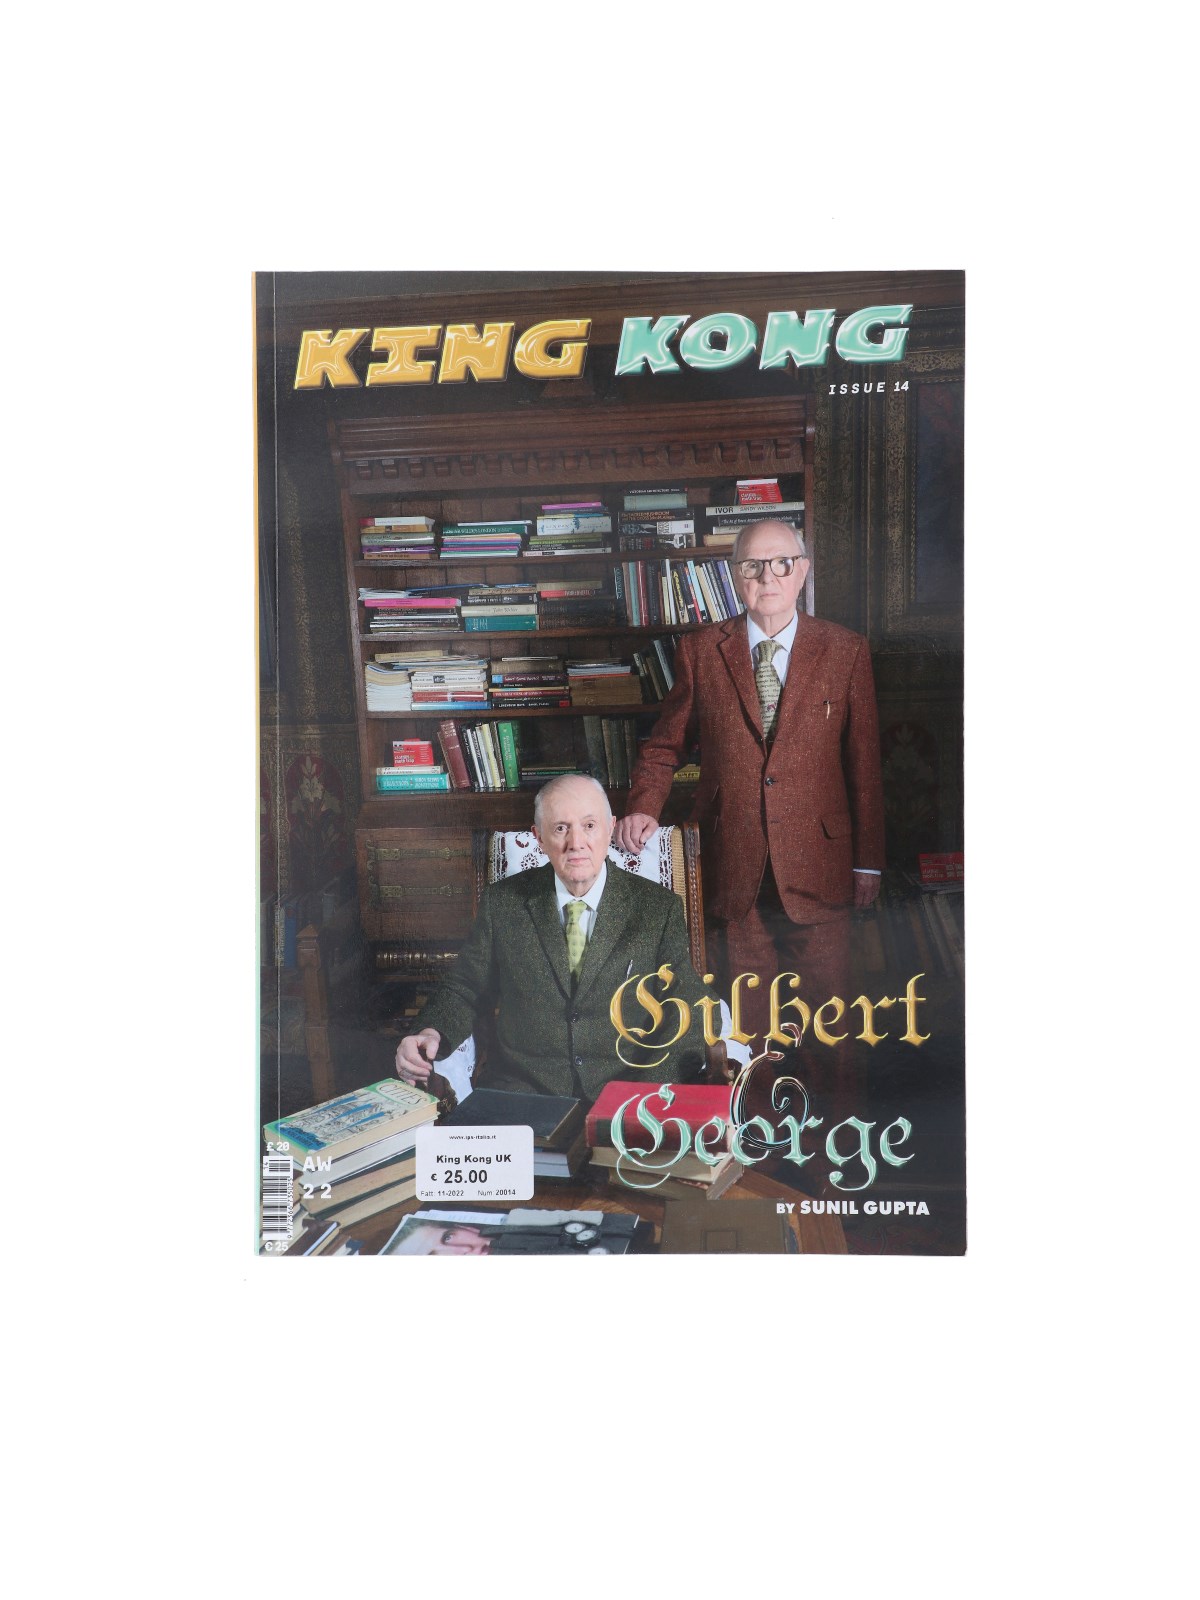 Magazine 'king Kong' Issue 14 In Multi